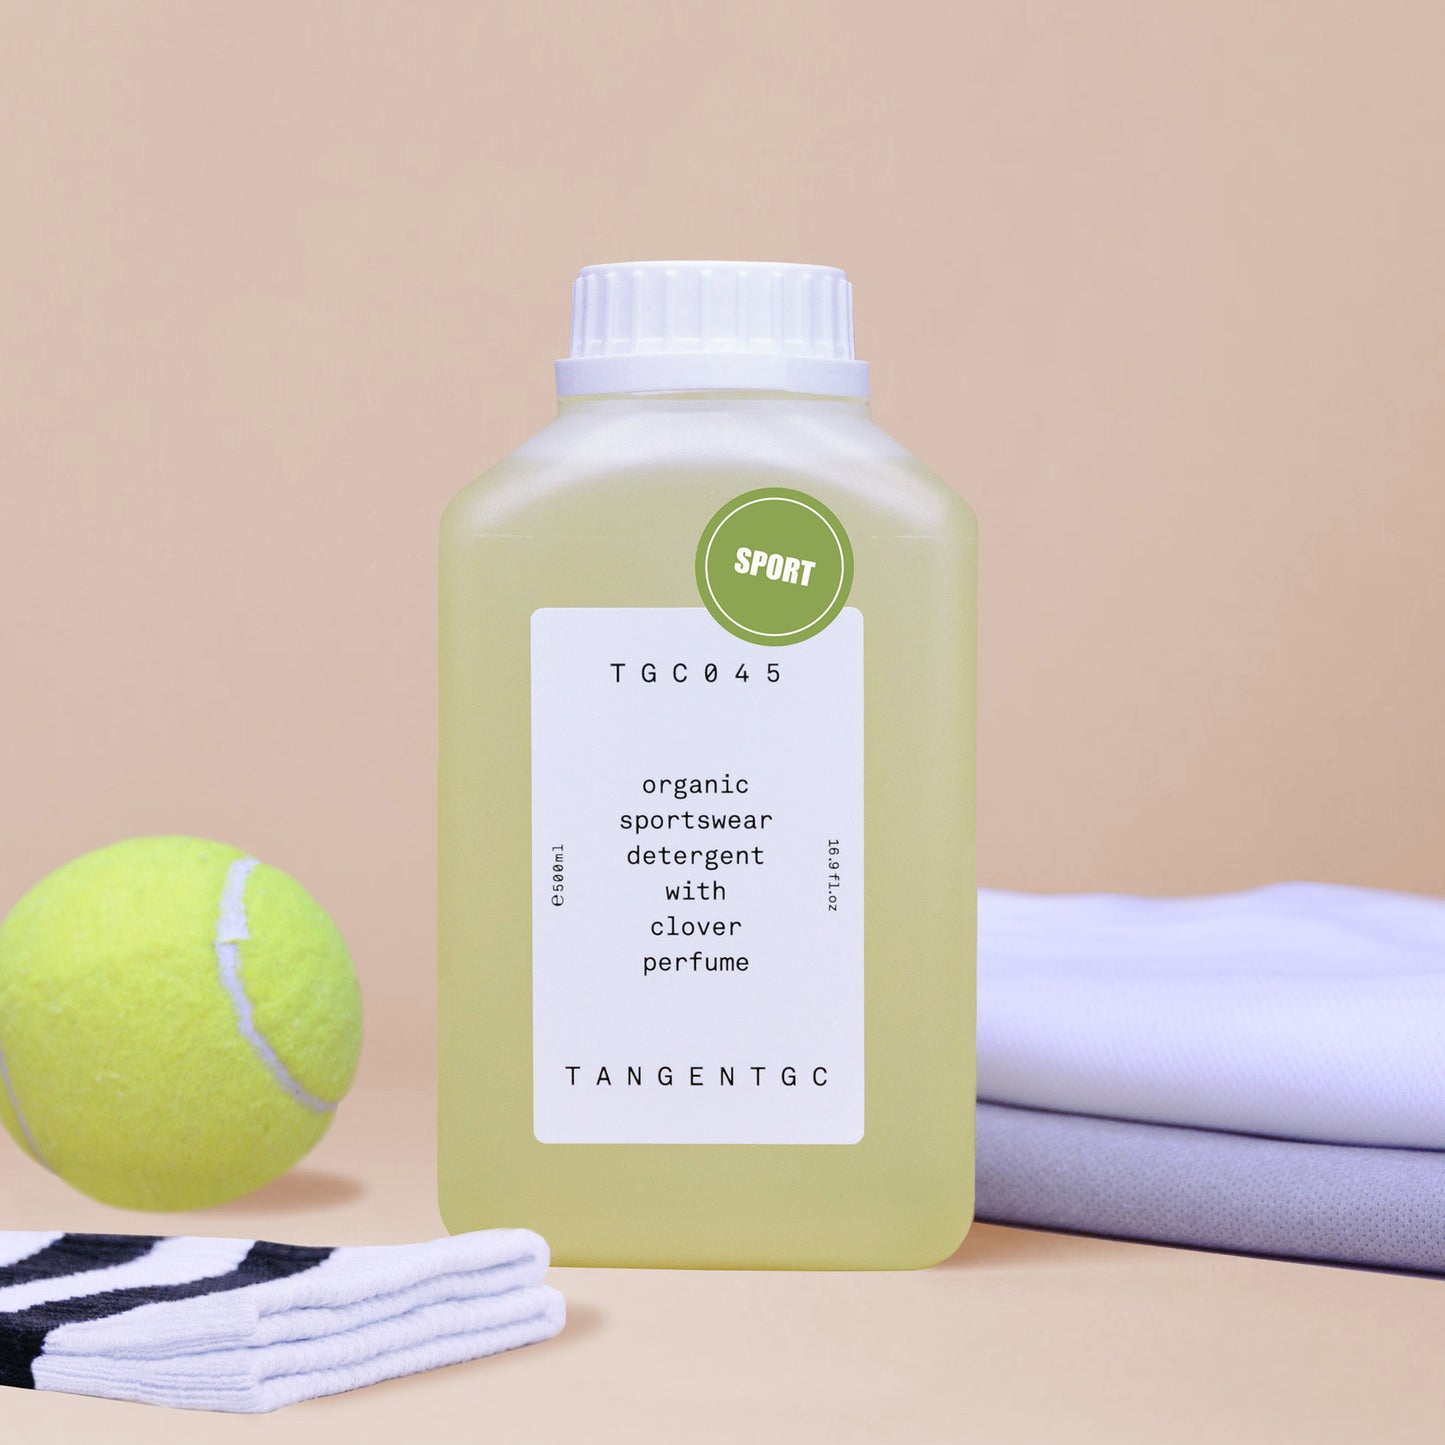 A rectangular bottle of sportswear detergent shot with tube socks, neatly folded t-shirts and a tennis ball